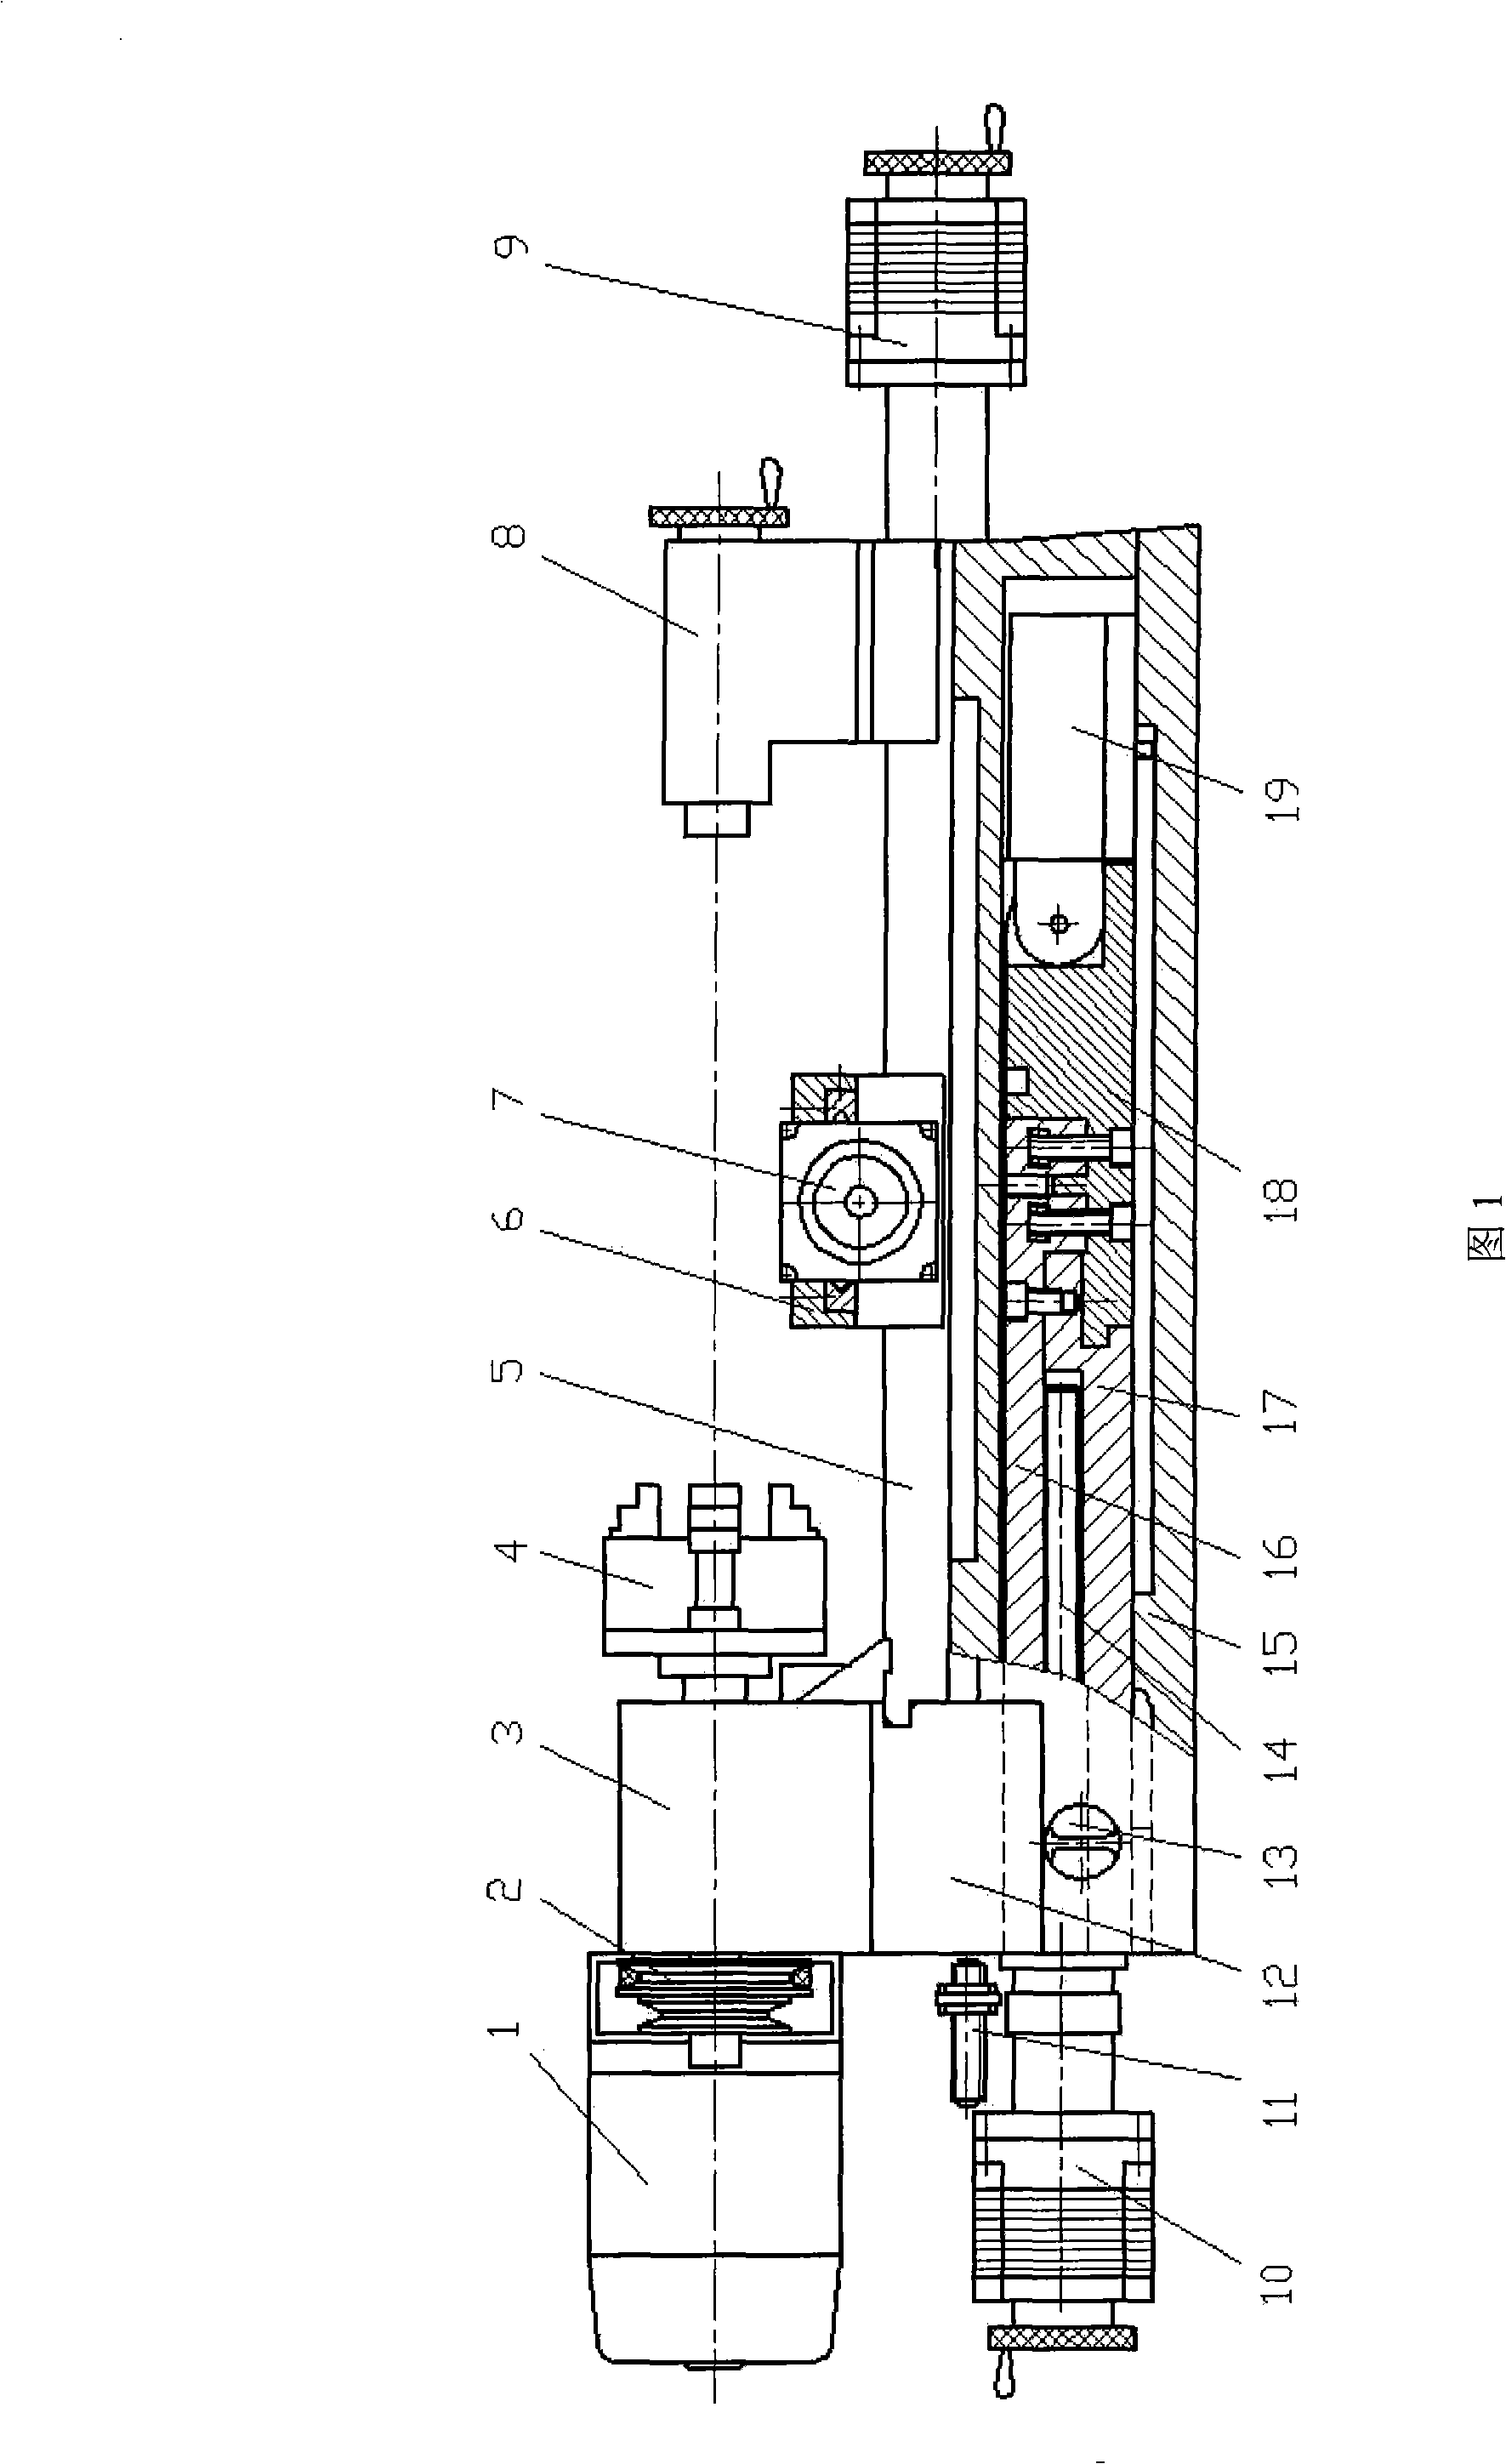 Changeable minisize multifunctional numerically-controlled machine tool